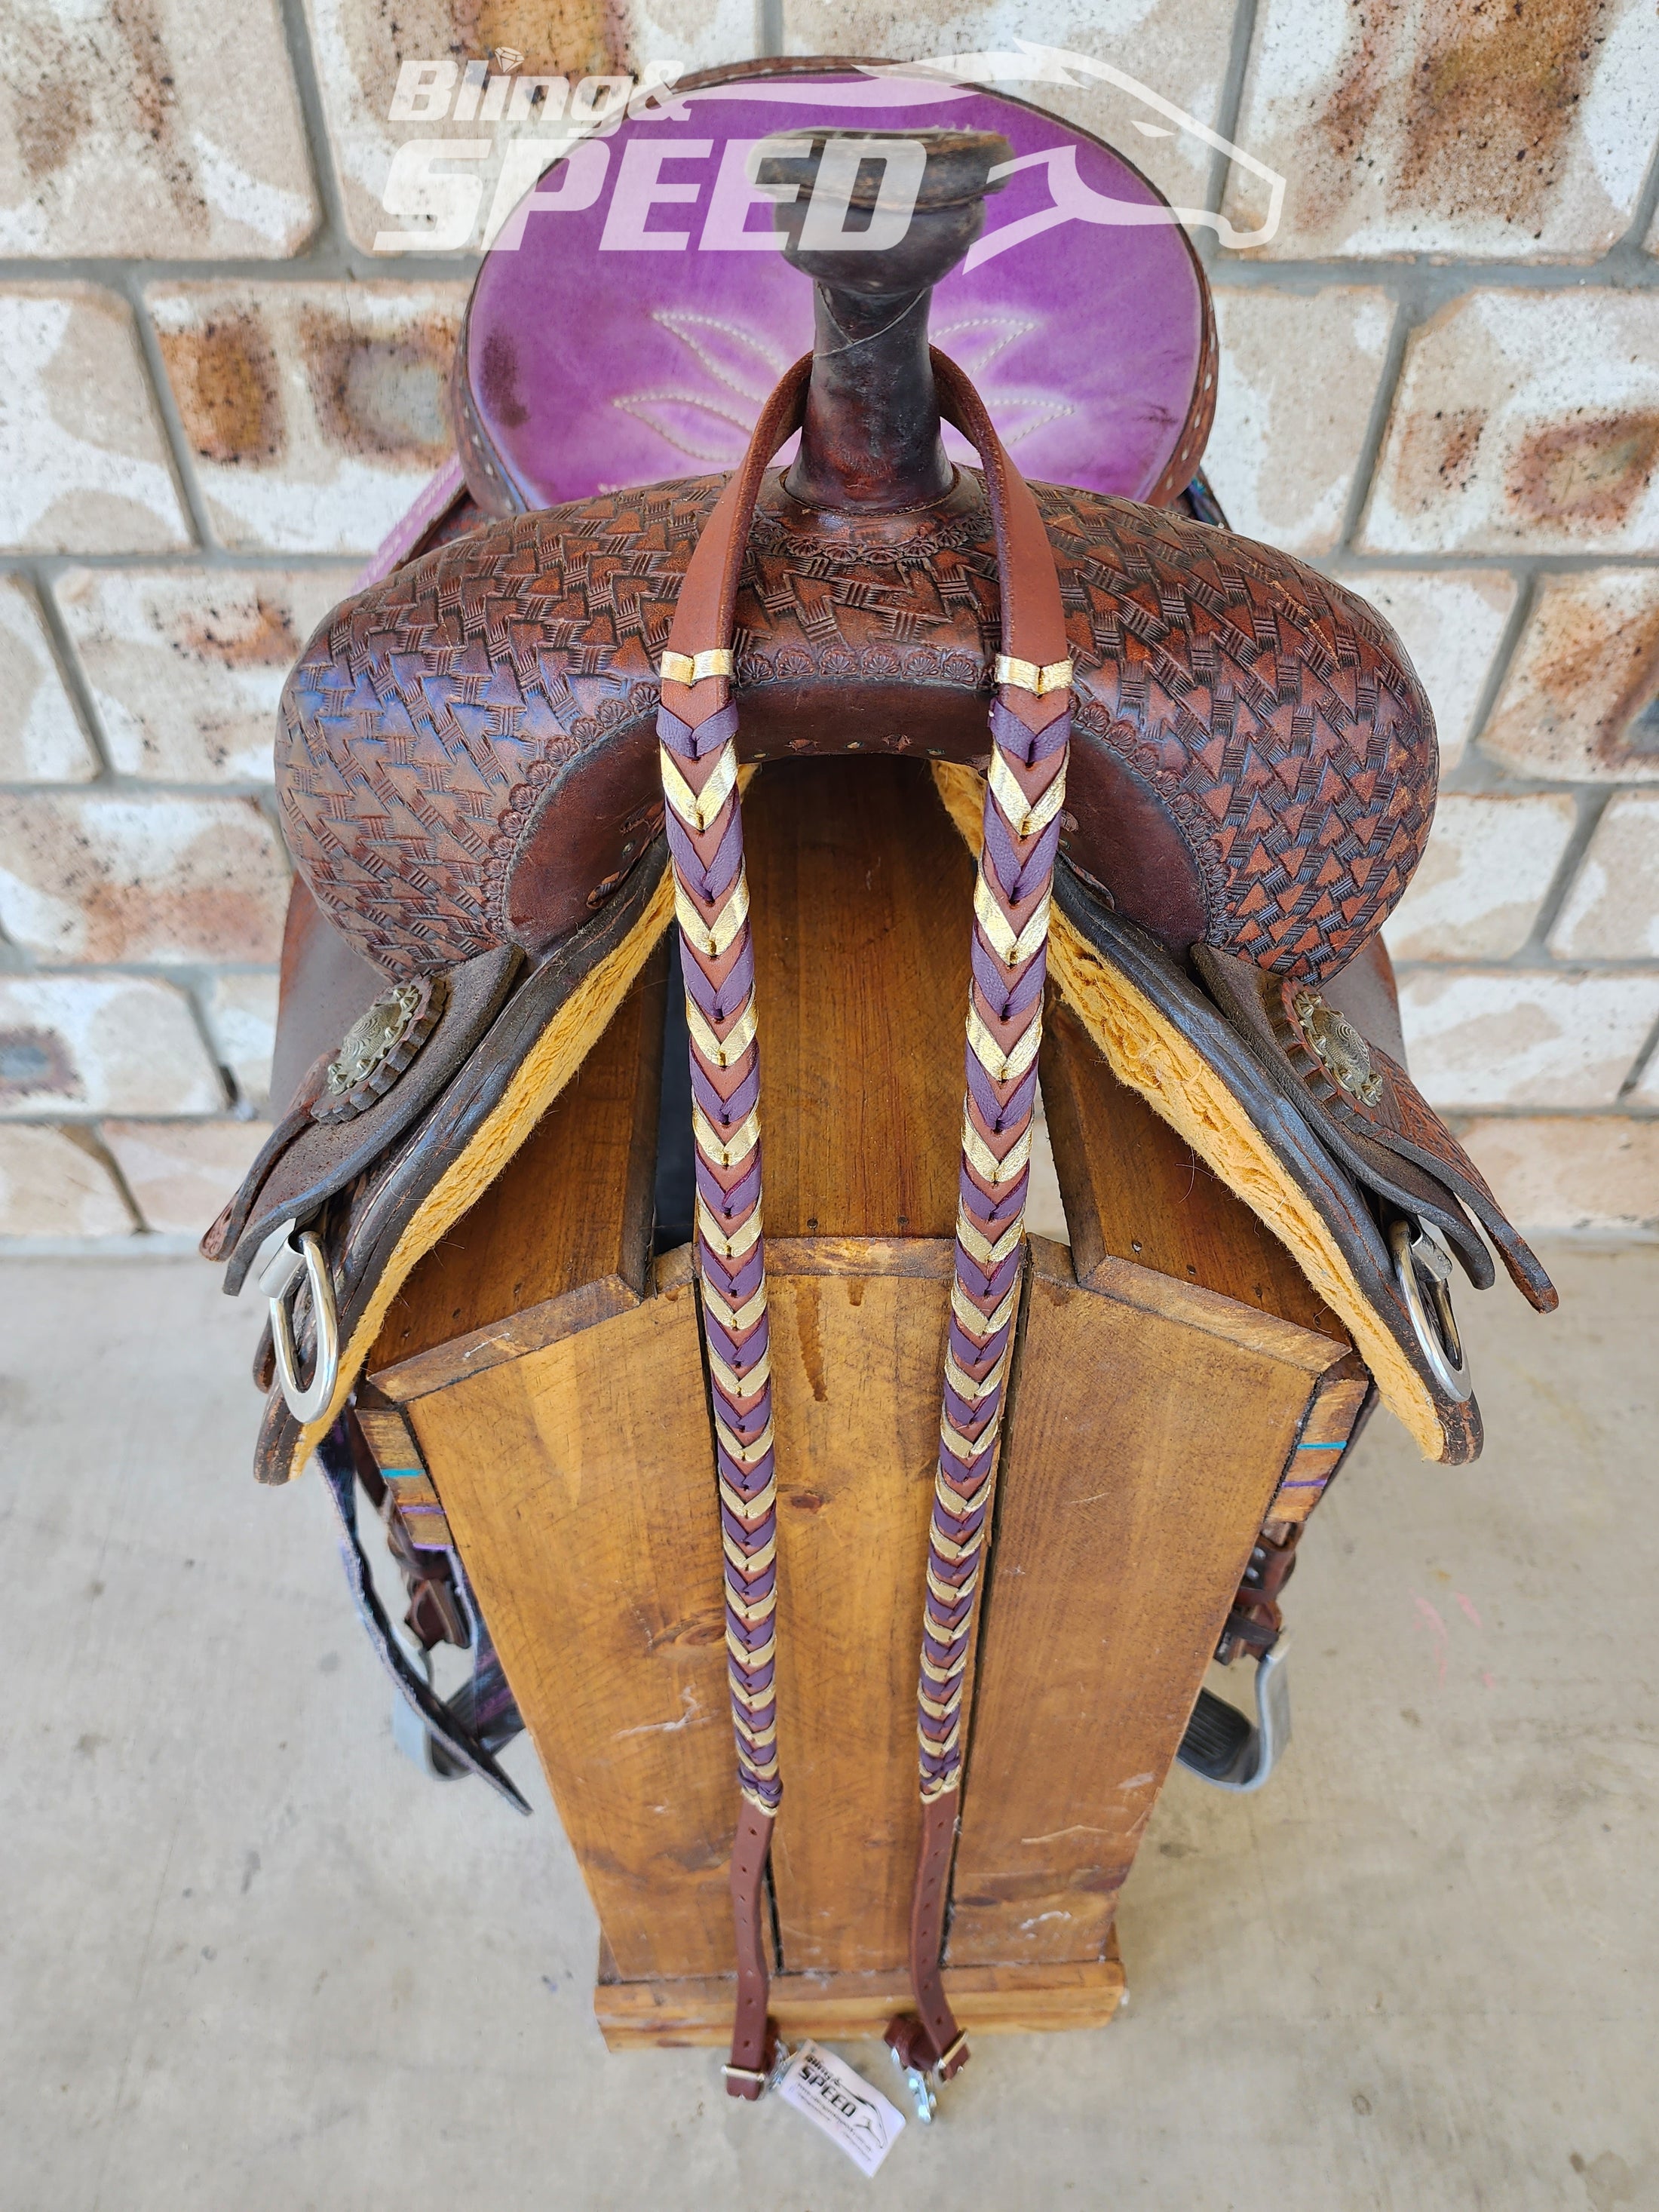 Bling and Speed Rose Gold and Purple Laced Barrel Reins (7897831047406)